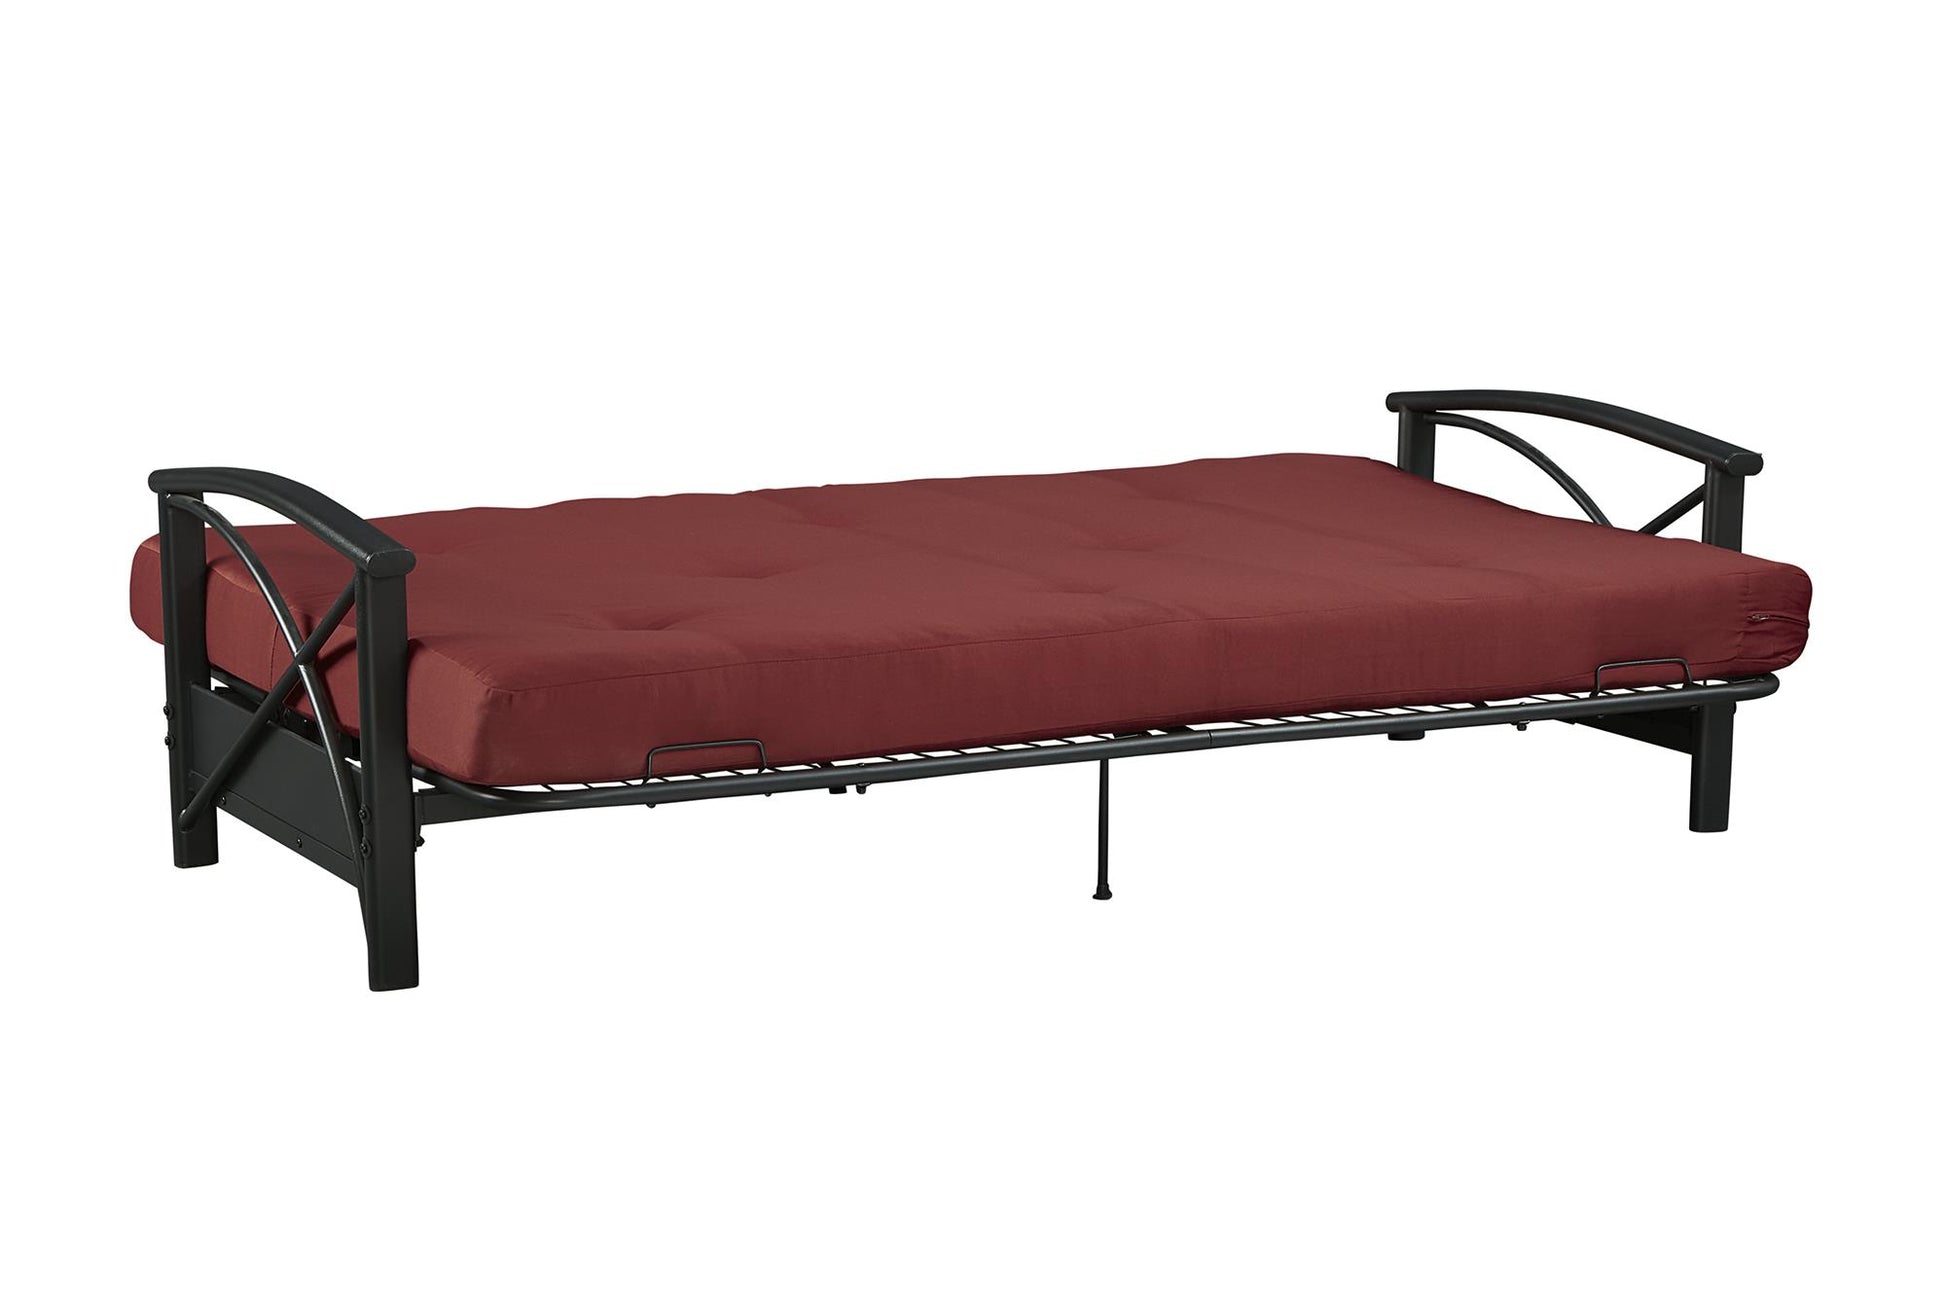 Carson 6 Inch Thermobonded High Density Polyester Fill Futon Mattress - Ruby Red - Full